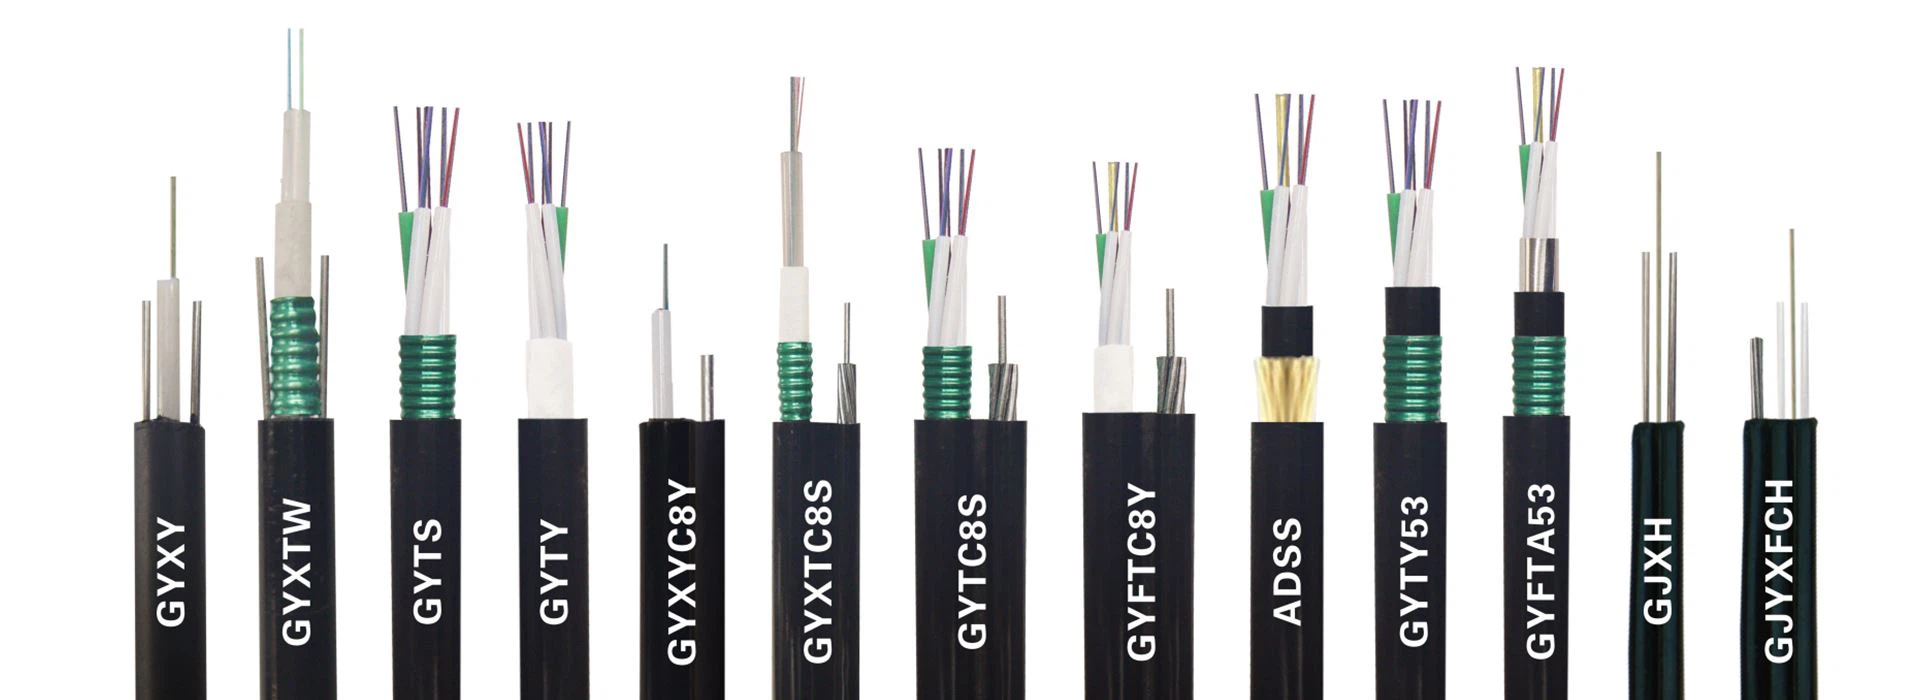 ADSS-S Single Sheath Self-Supporting Optical Fiber Cable